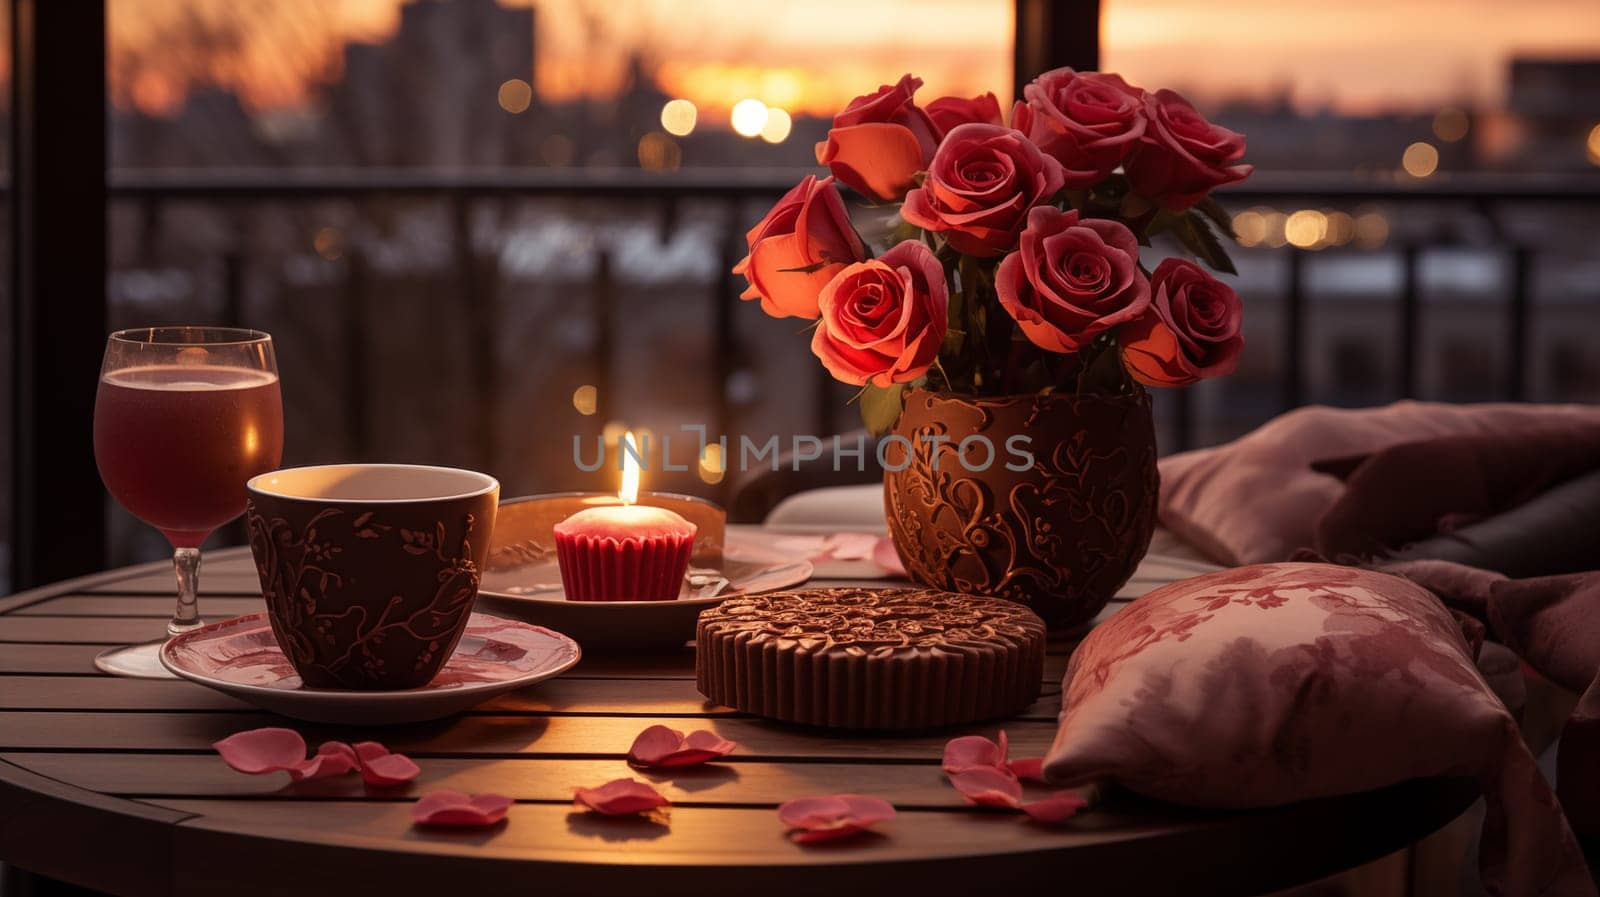 a dining table with lighted candles, red roses and elegant dishes against the background of the twilight sky outside the window.